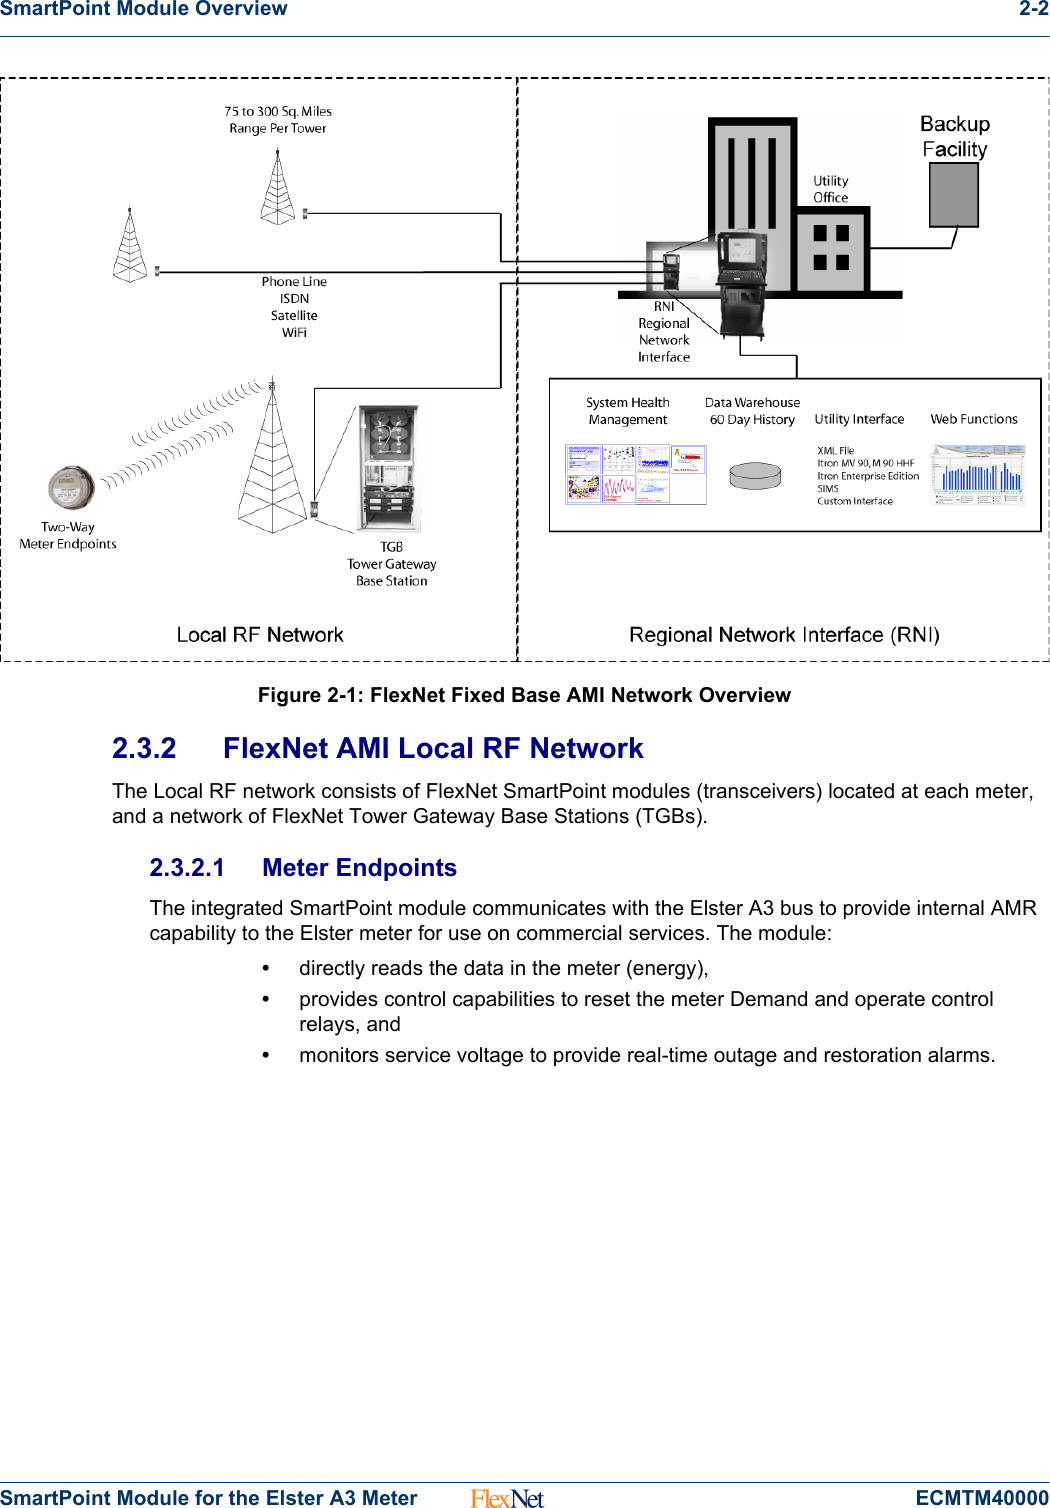 SmartPoint Module Overview 2-2SmartPoint Module for the Elster A3 Meter ECMTM40000Figure 2-1: FlexNet Fixed Base AMI Network Overview2.3.2 FlexNet AMI Local RF Network The Local RF network consists of FlexNet SmartPoint modules (transceivers) located at each meter, and a network of FlexNet Tower Gateway Base Stations (TGBs). 2.3.2.1 Meter EndpointsThe integrated SmartPoint module communicates with the Elster A3 bus to provide internal AMR capability to the Elster meter for use on commercial services. The module:•directly reads the data in the meter (energy),•provides control capabilities to reset the meter Demand and operate control relays, and•monitors service voltage to provide real-time outage and restoration alarms.